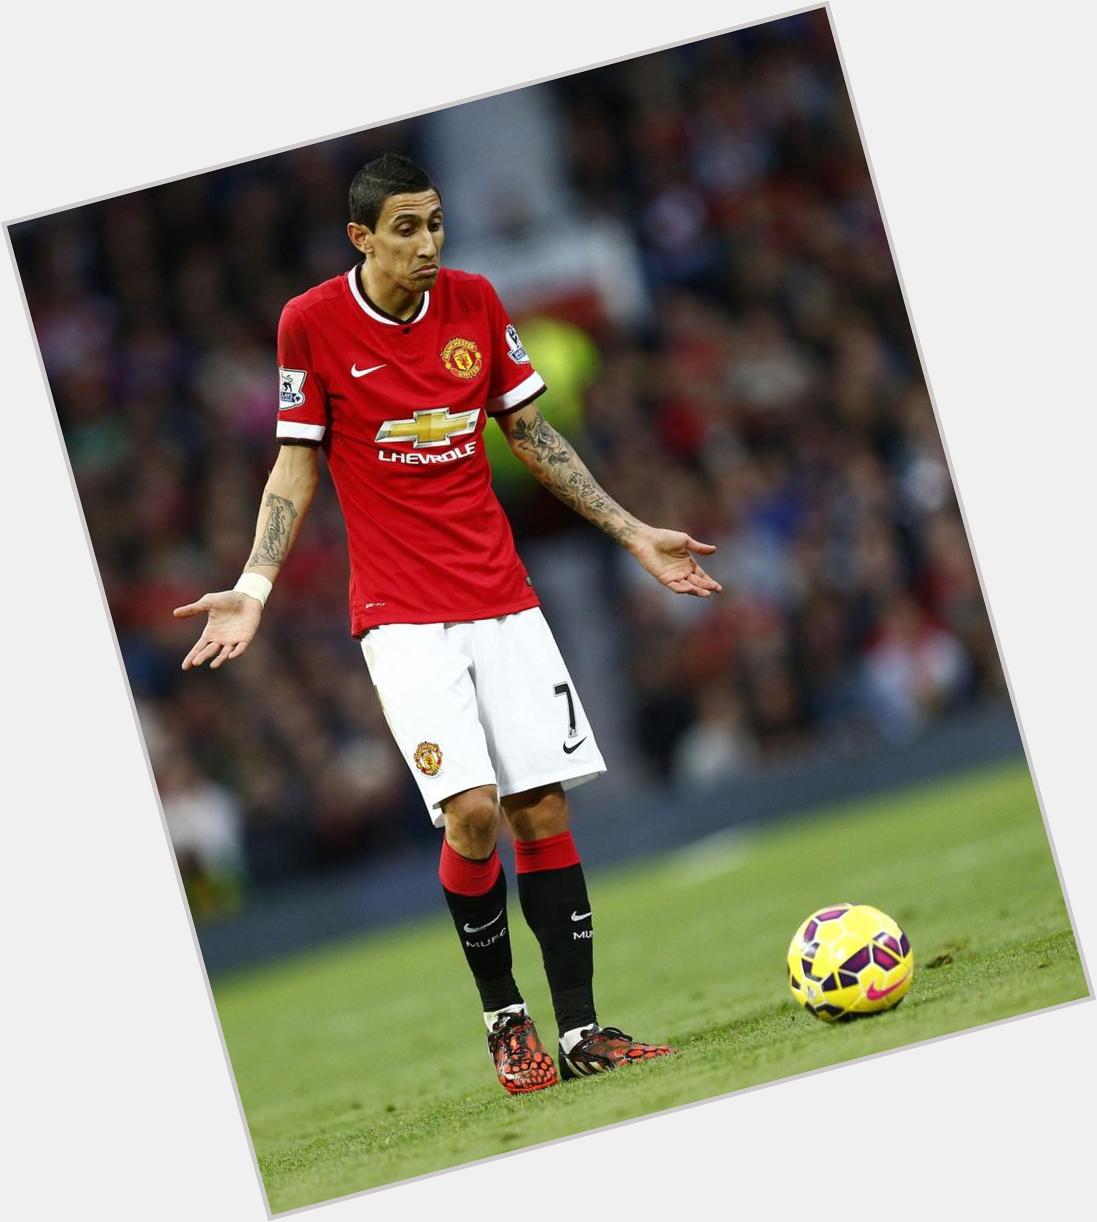 What a fitting name for someone born on this day. happy 27th birthday, angel di maria. 